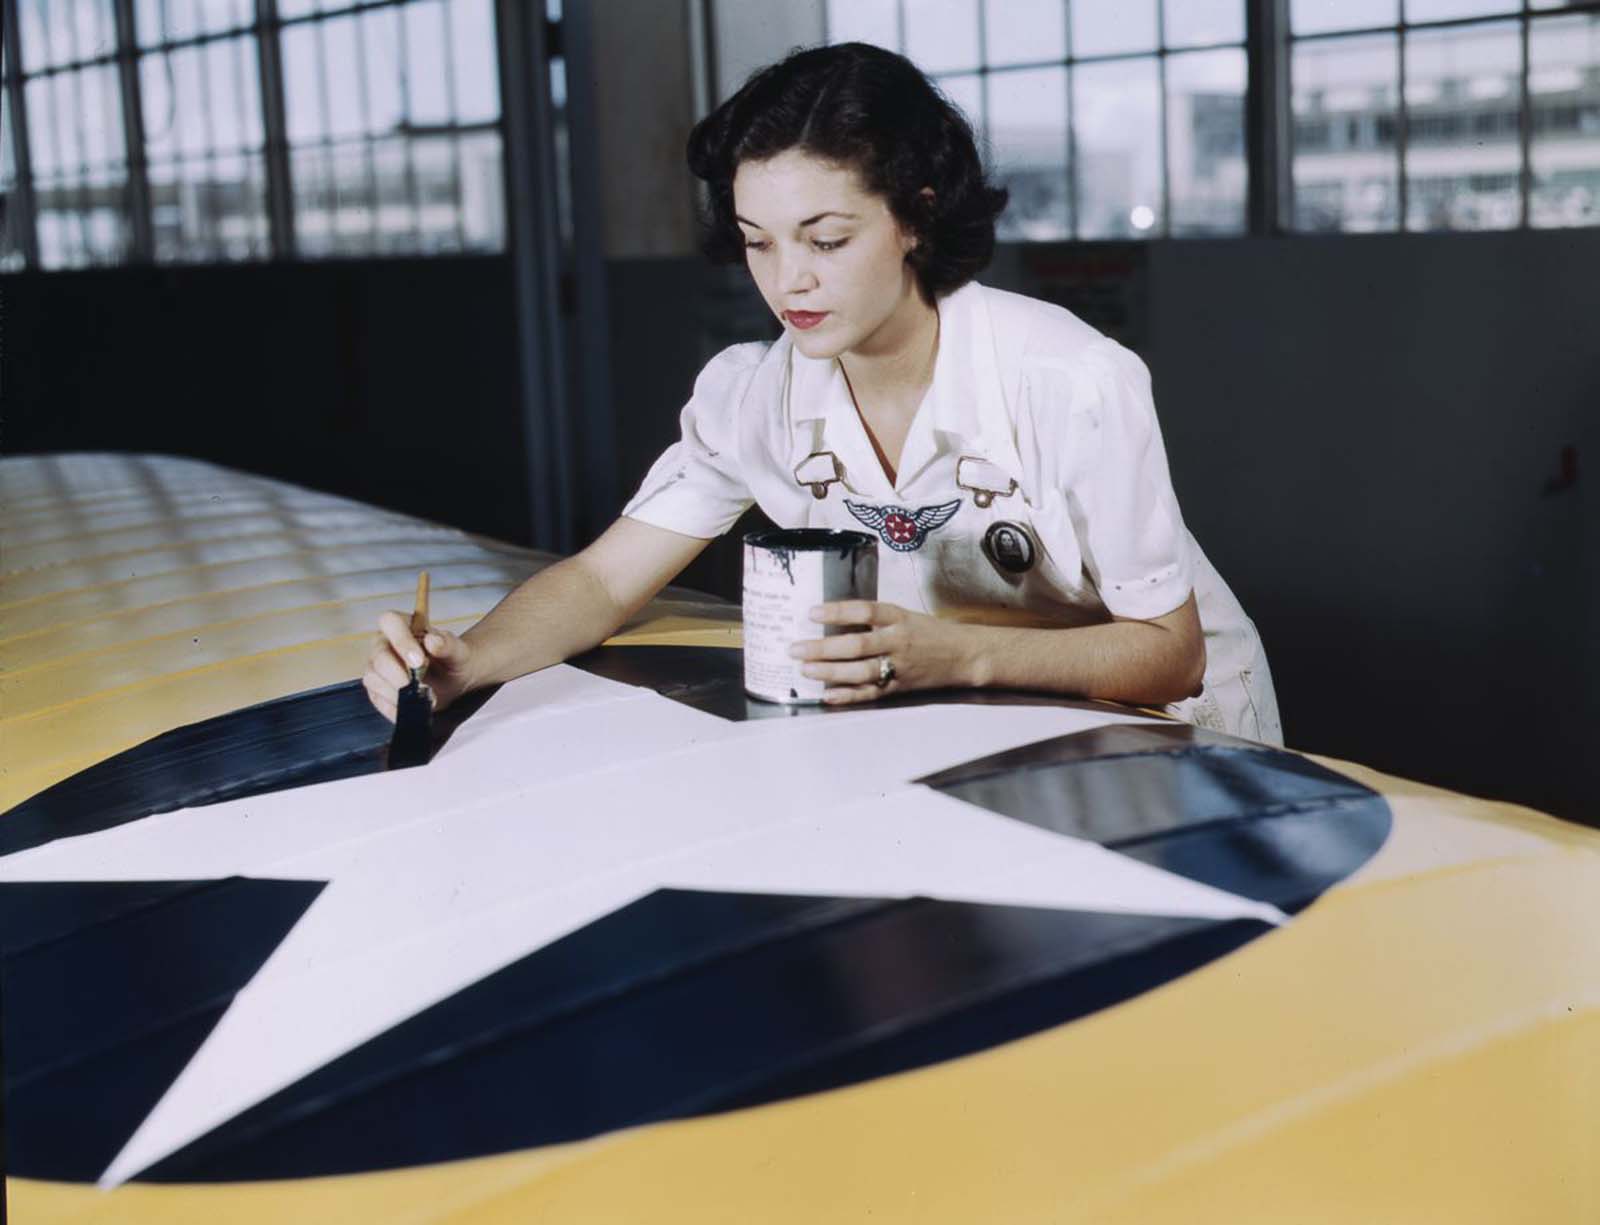 Irma Lee McElroy, a former office worker, paints an insignia on an airplane wing.